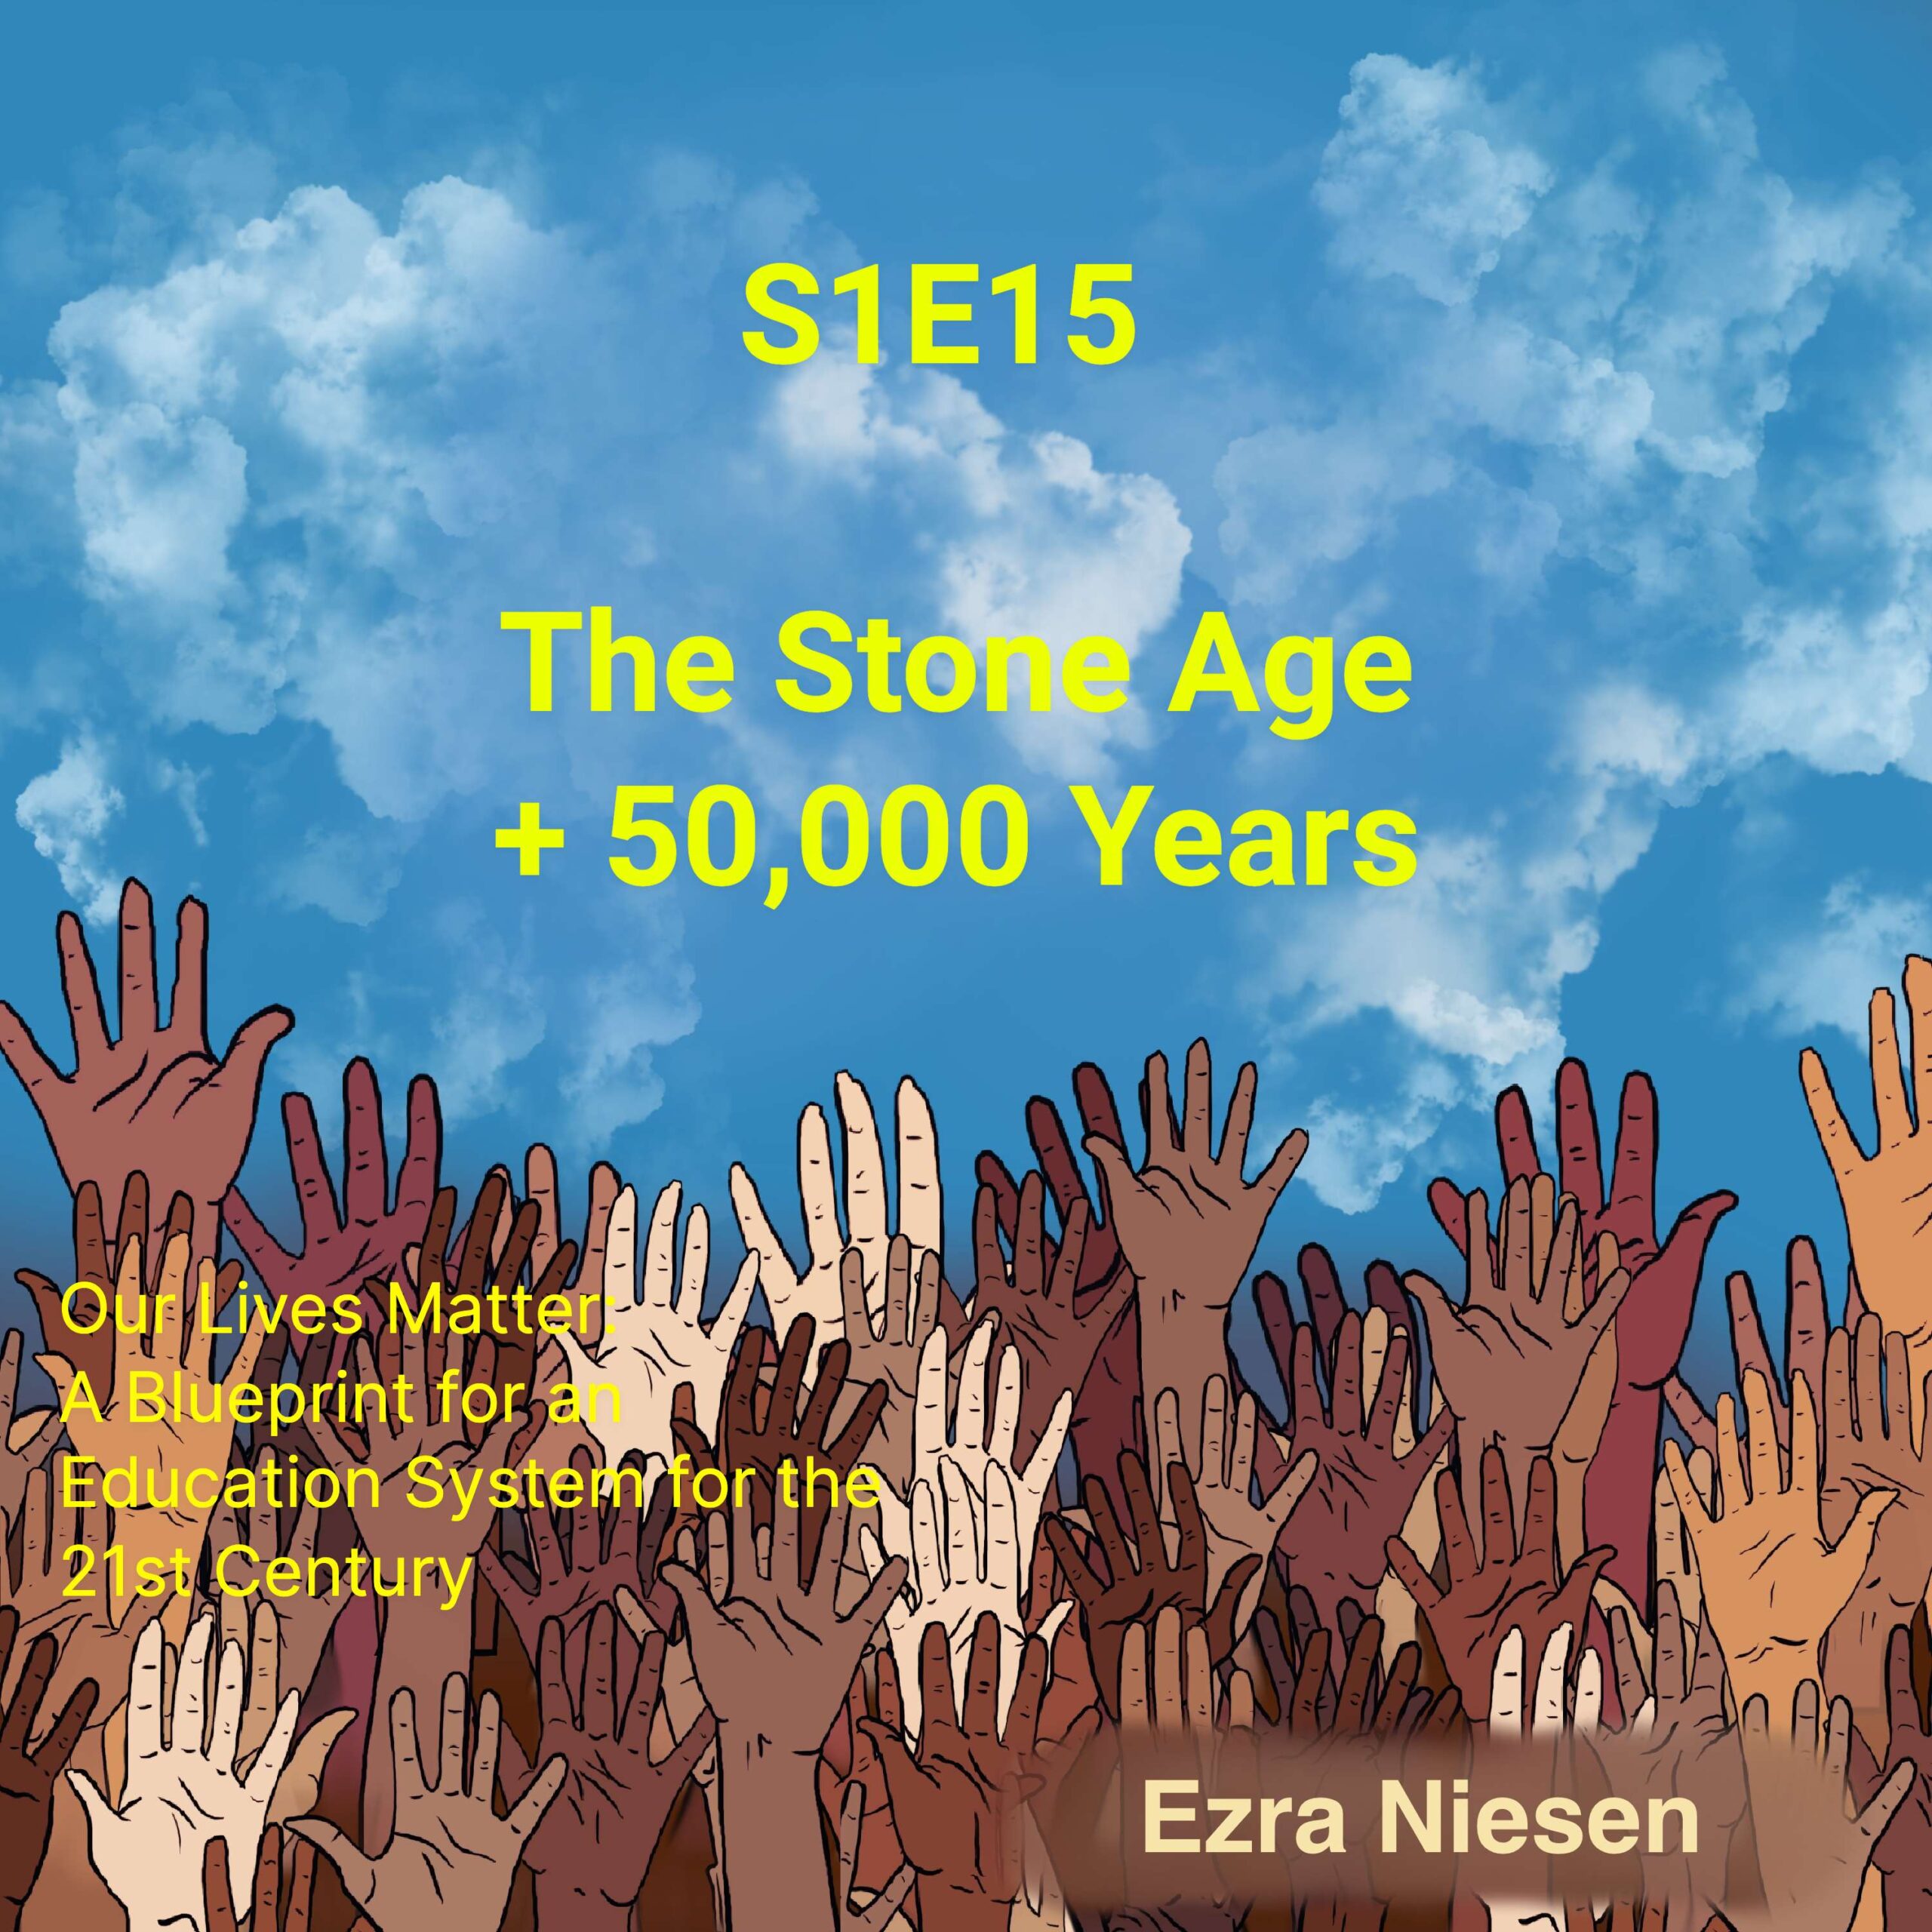 Our Lives Matter S1E15:  The Stone Age + 50,000 Years